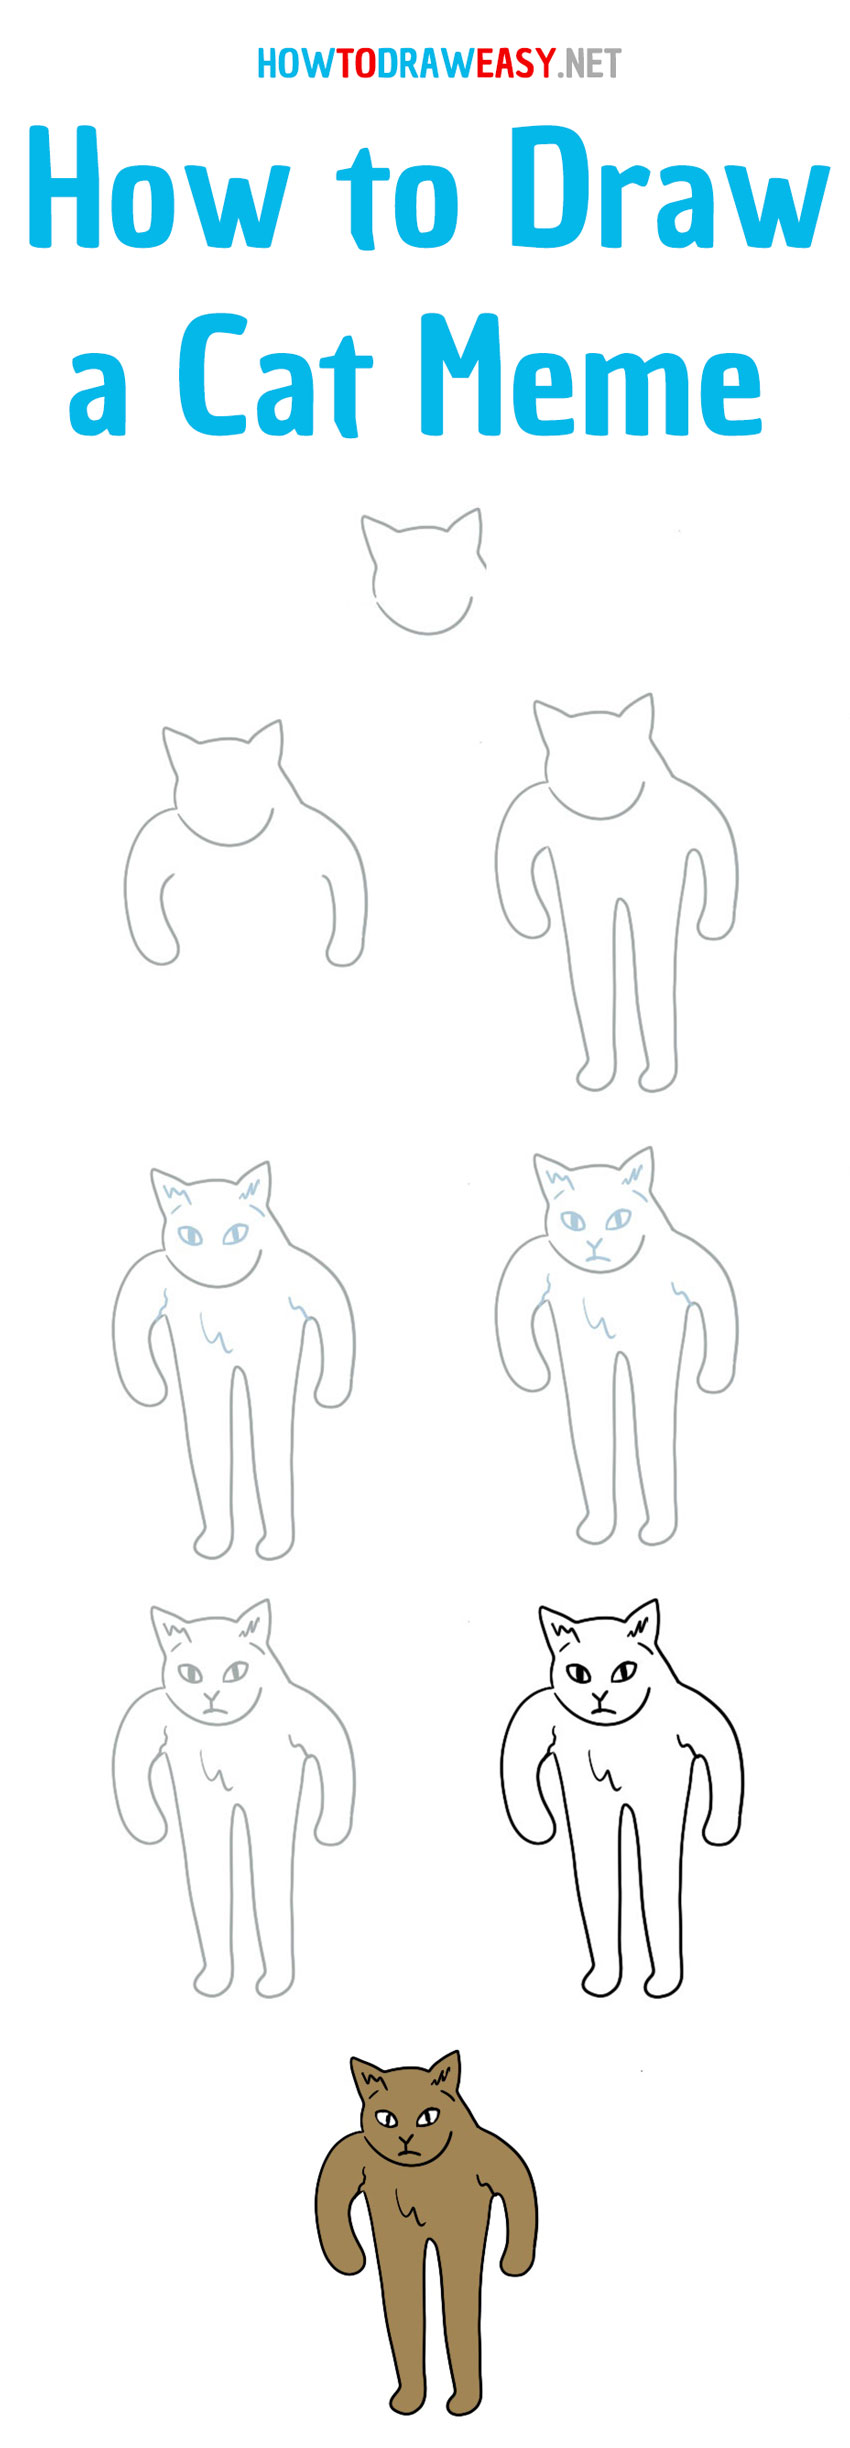 how-to-draw-a-cat-meme-step-by-step